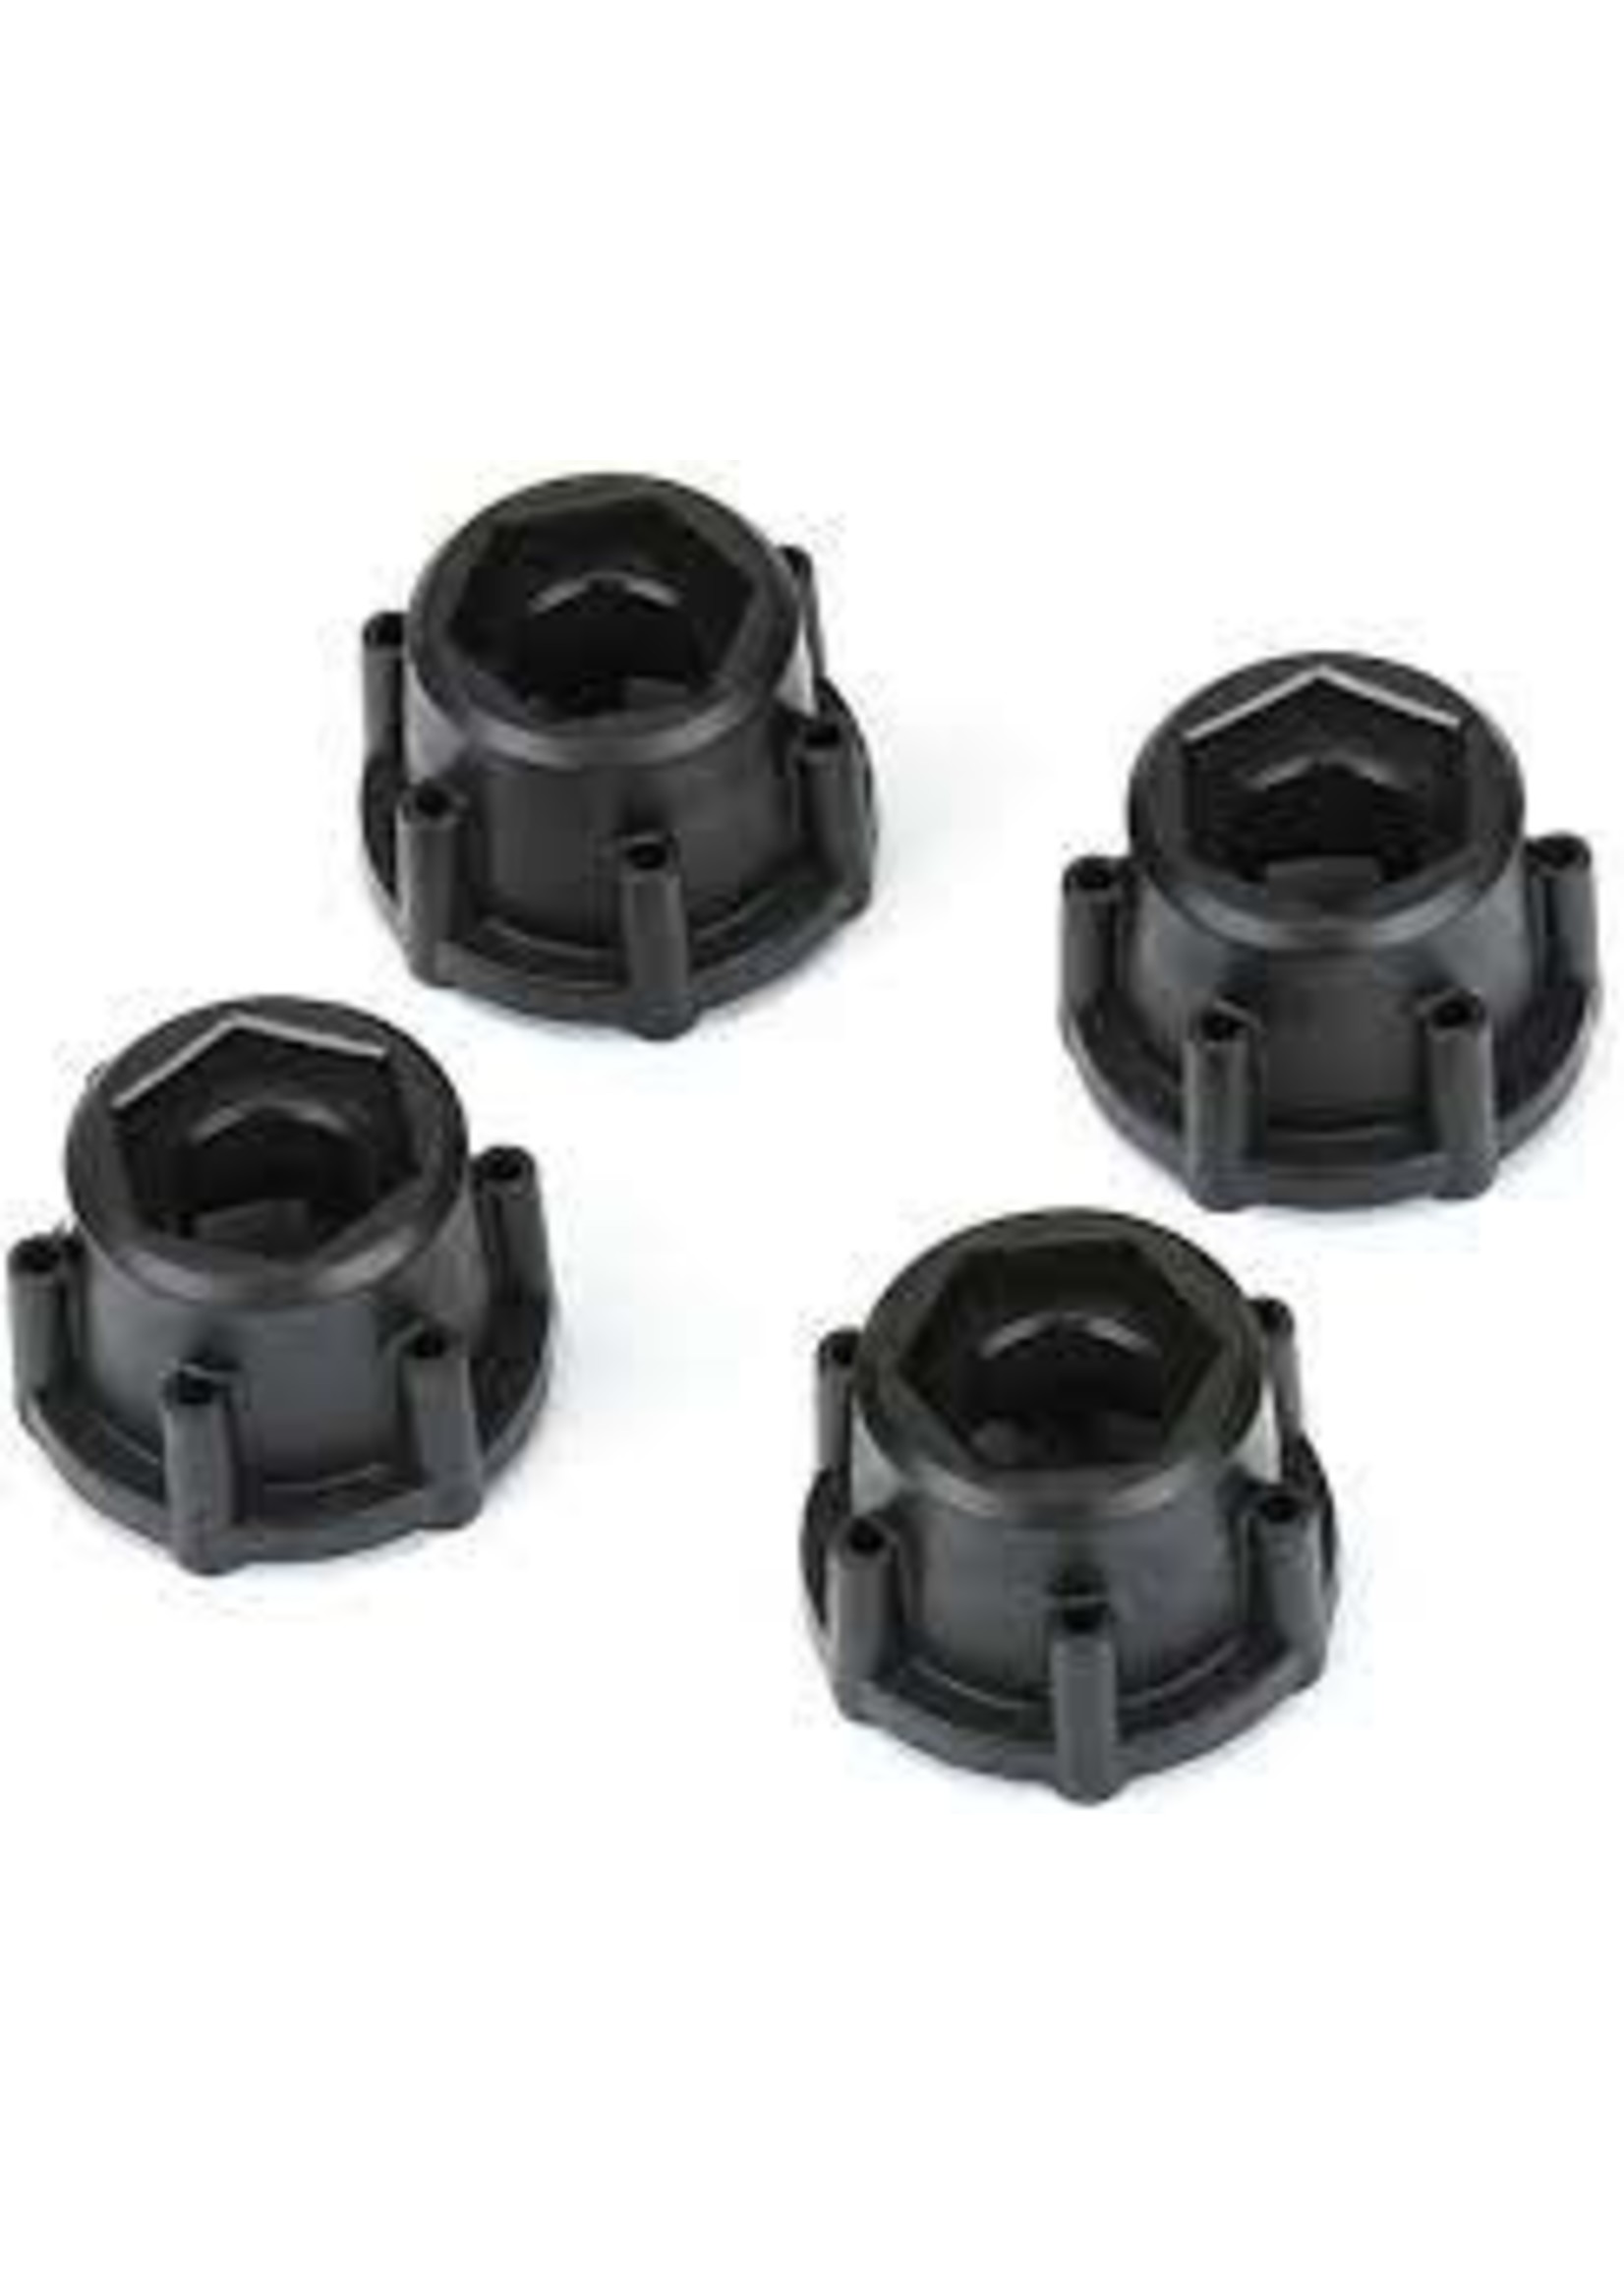 Pro-Line PRO634500 8x32 to 17mm Hex Adapters for 8x32 3.8" Wheels